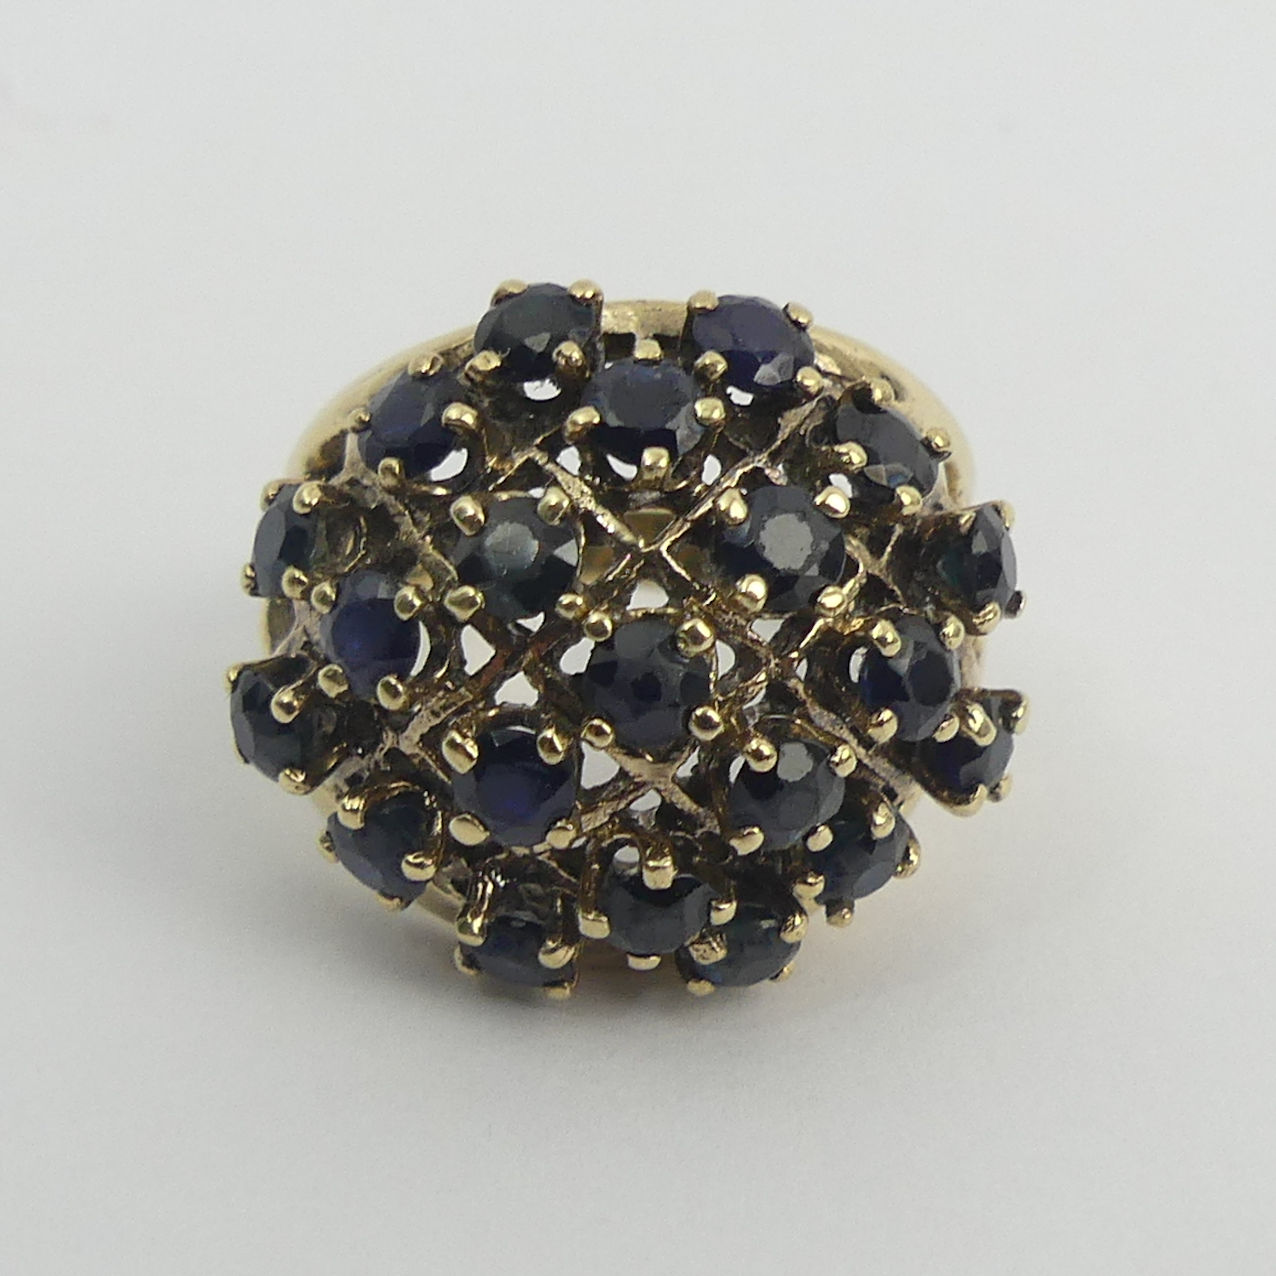 9ct gold sapphire bombe design ring, 7.5 grams, Birm.1963. Size M, 18.5 mm. UK Postage £12. - Image 2 of 5